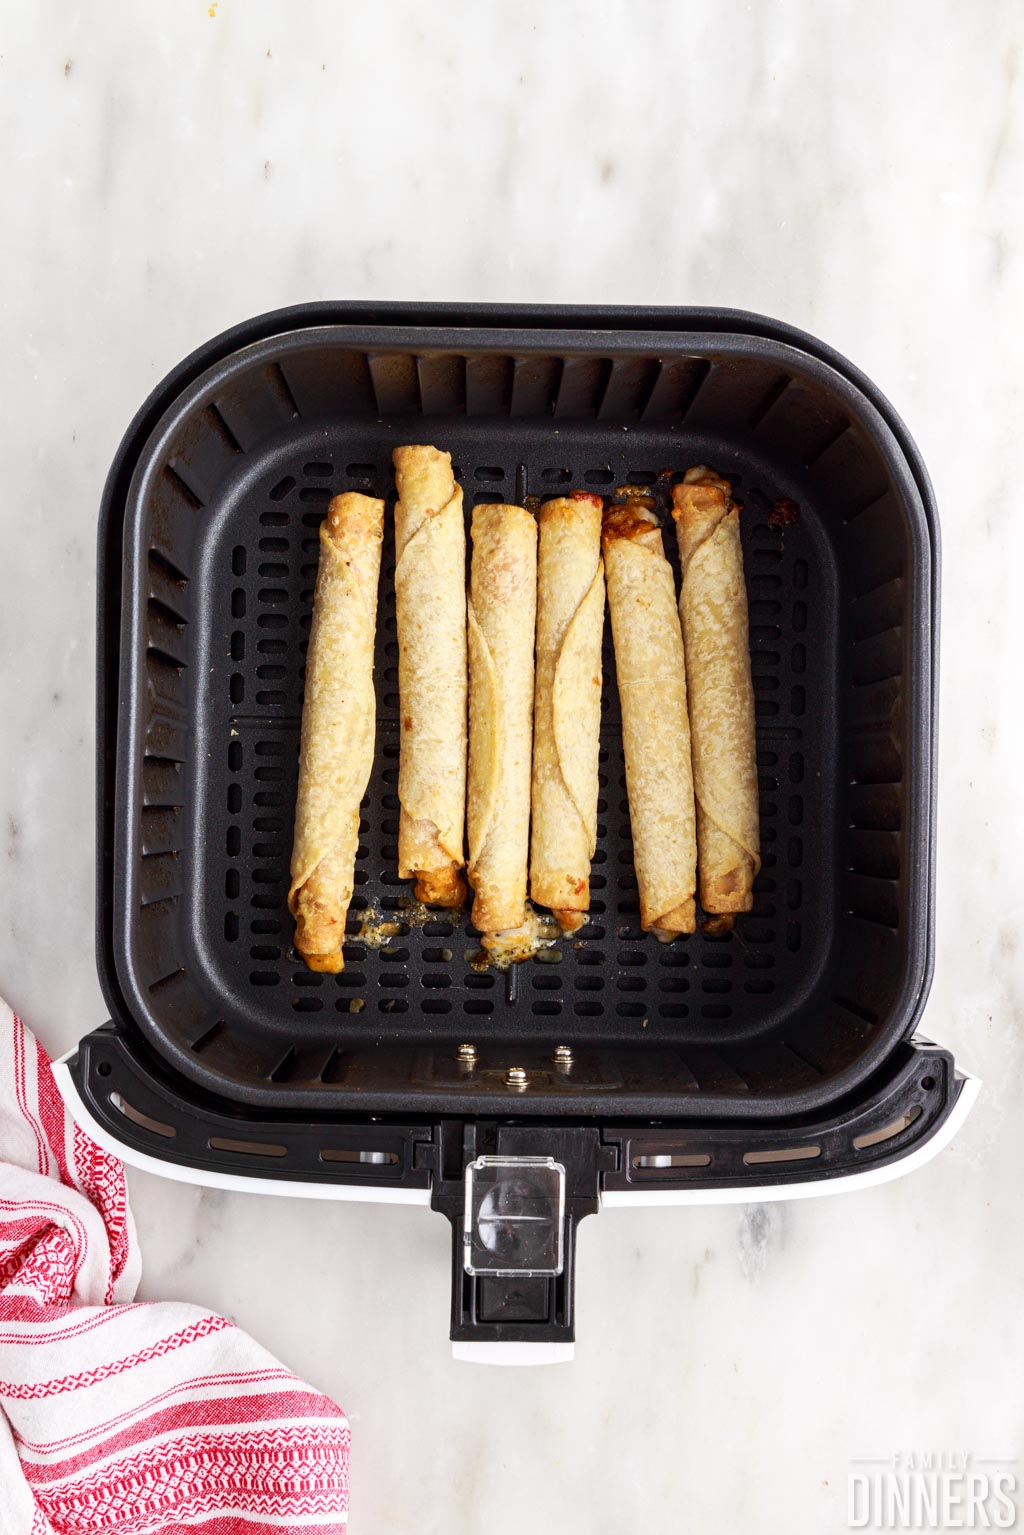 Cooked taquitos in an air fryer.